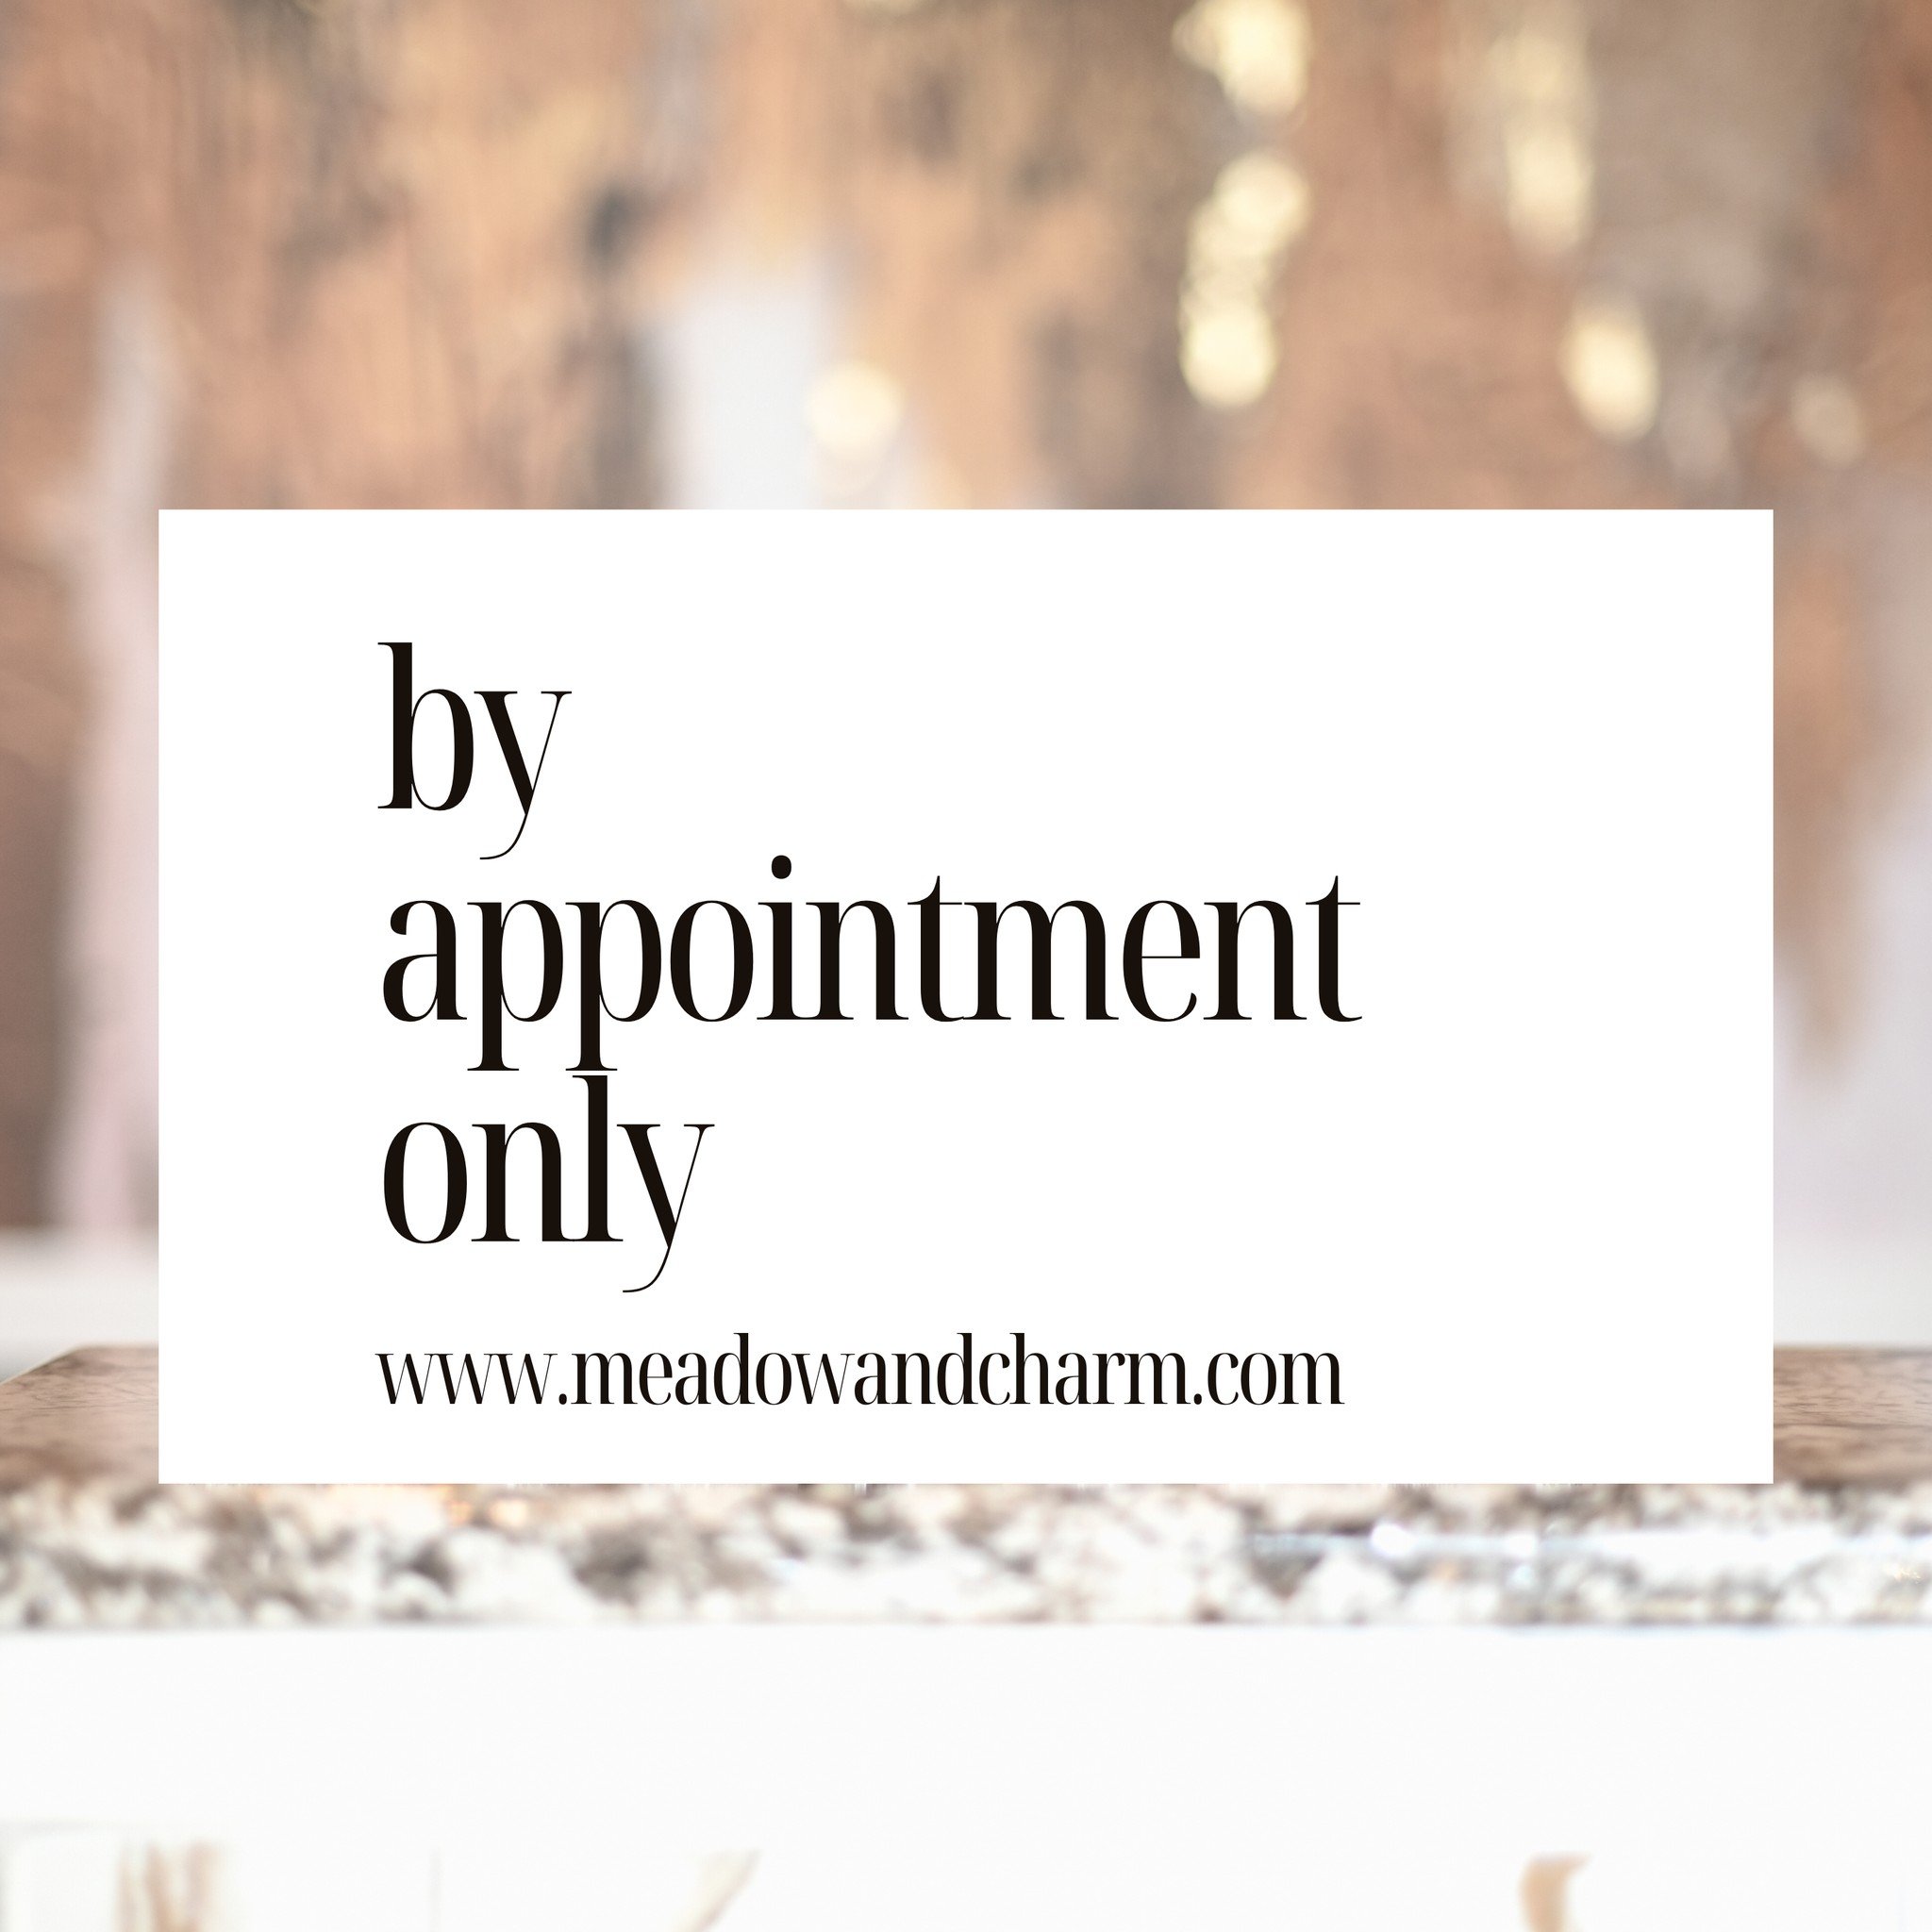 Meadow and Charm operates by appointment only at both of our beautiful locations.  This allows us to dedicate time for each individual client, without anyone feeling rushed. We know your time is valuable, and scheduling appointments decreases wait ti